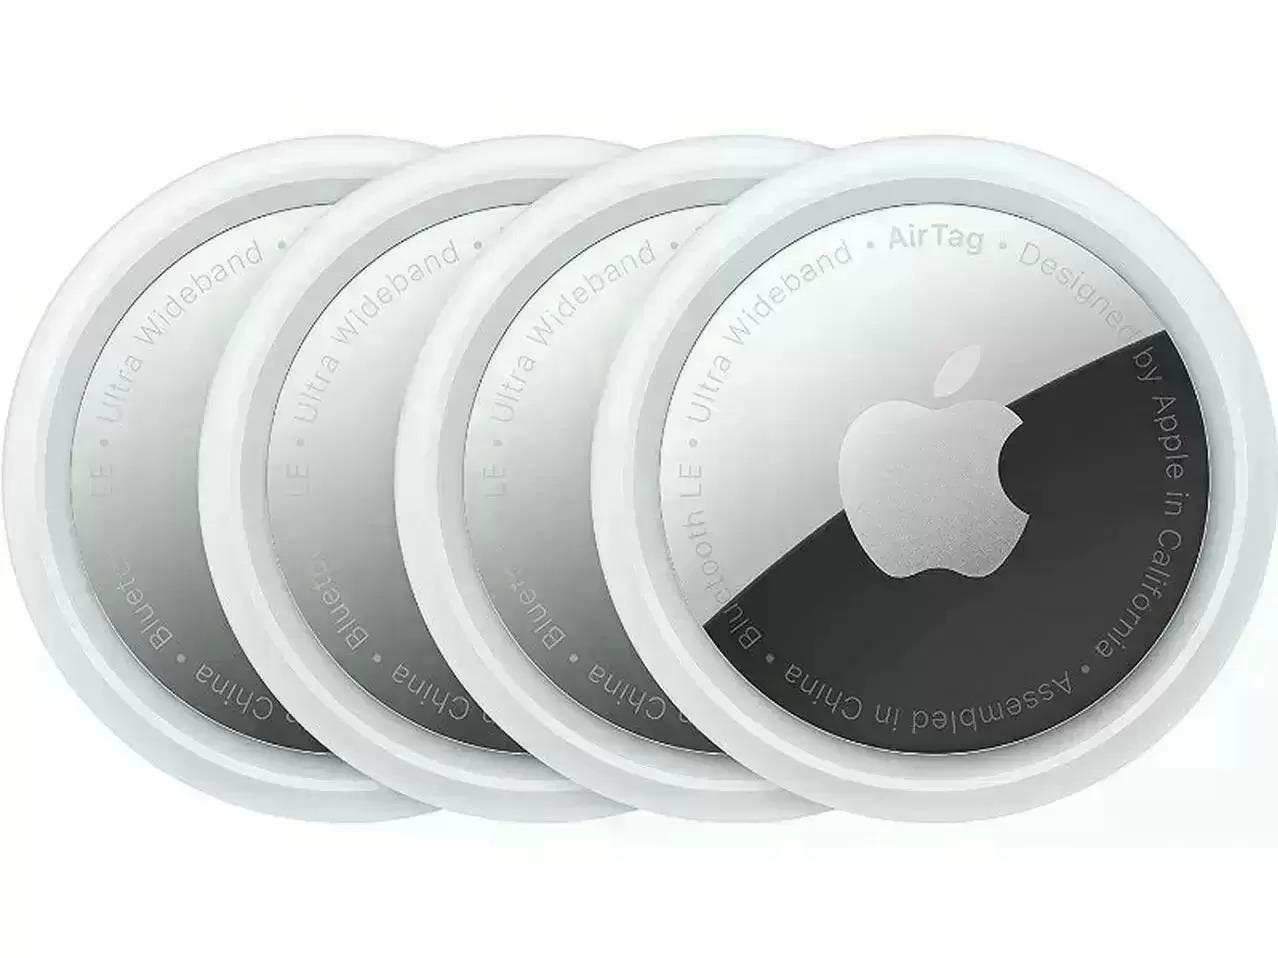 4 Apple AirTags for $85.49 Shipped